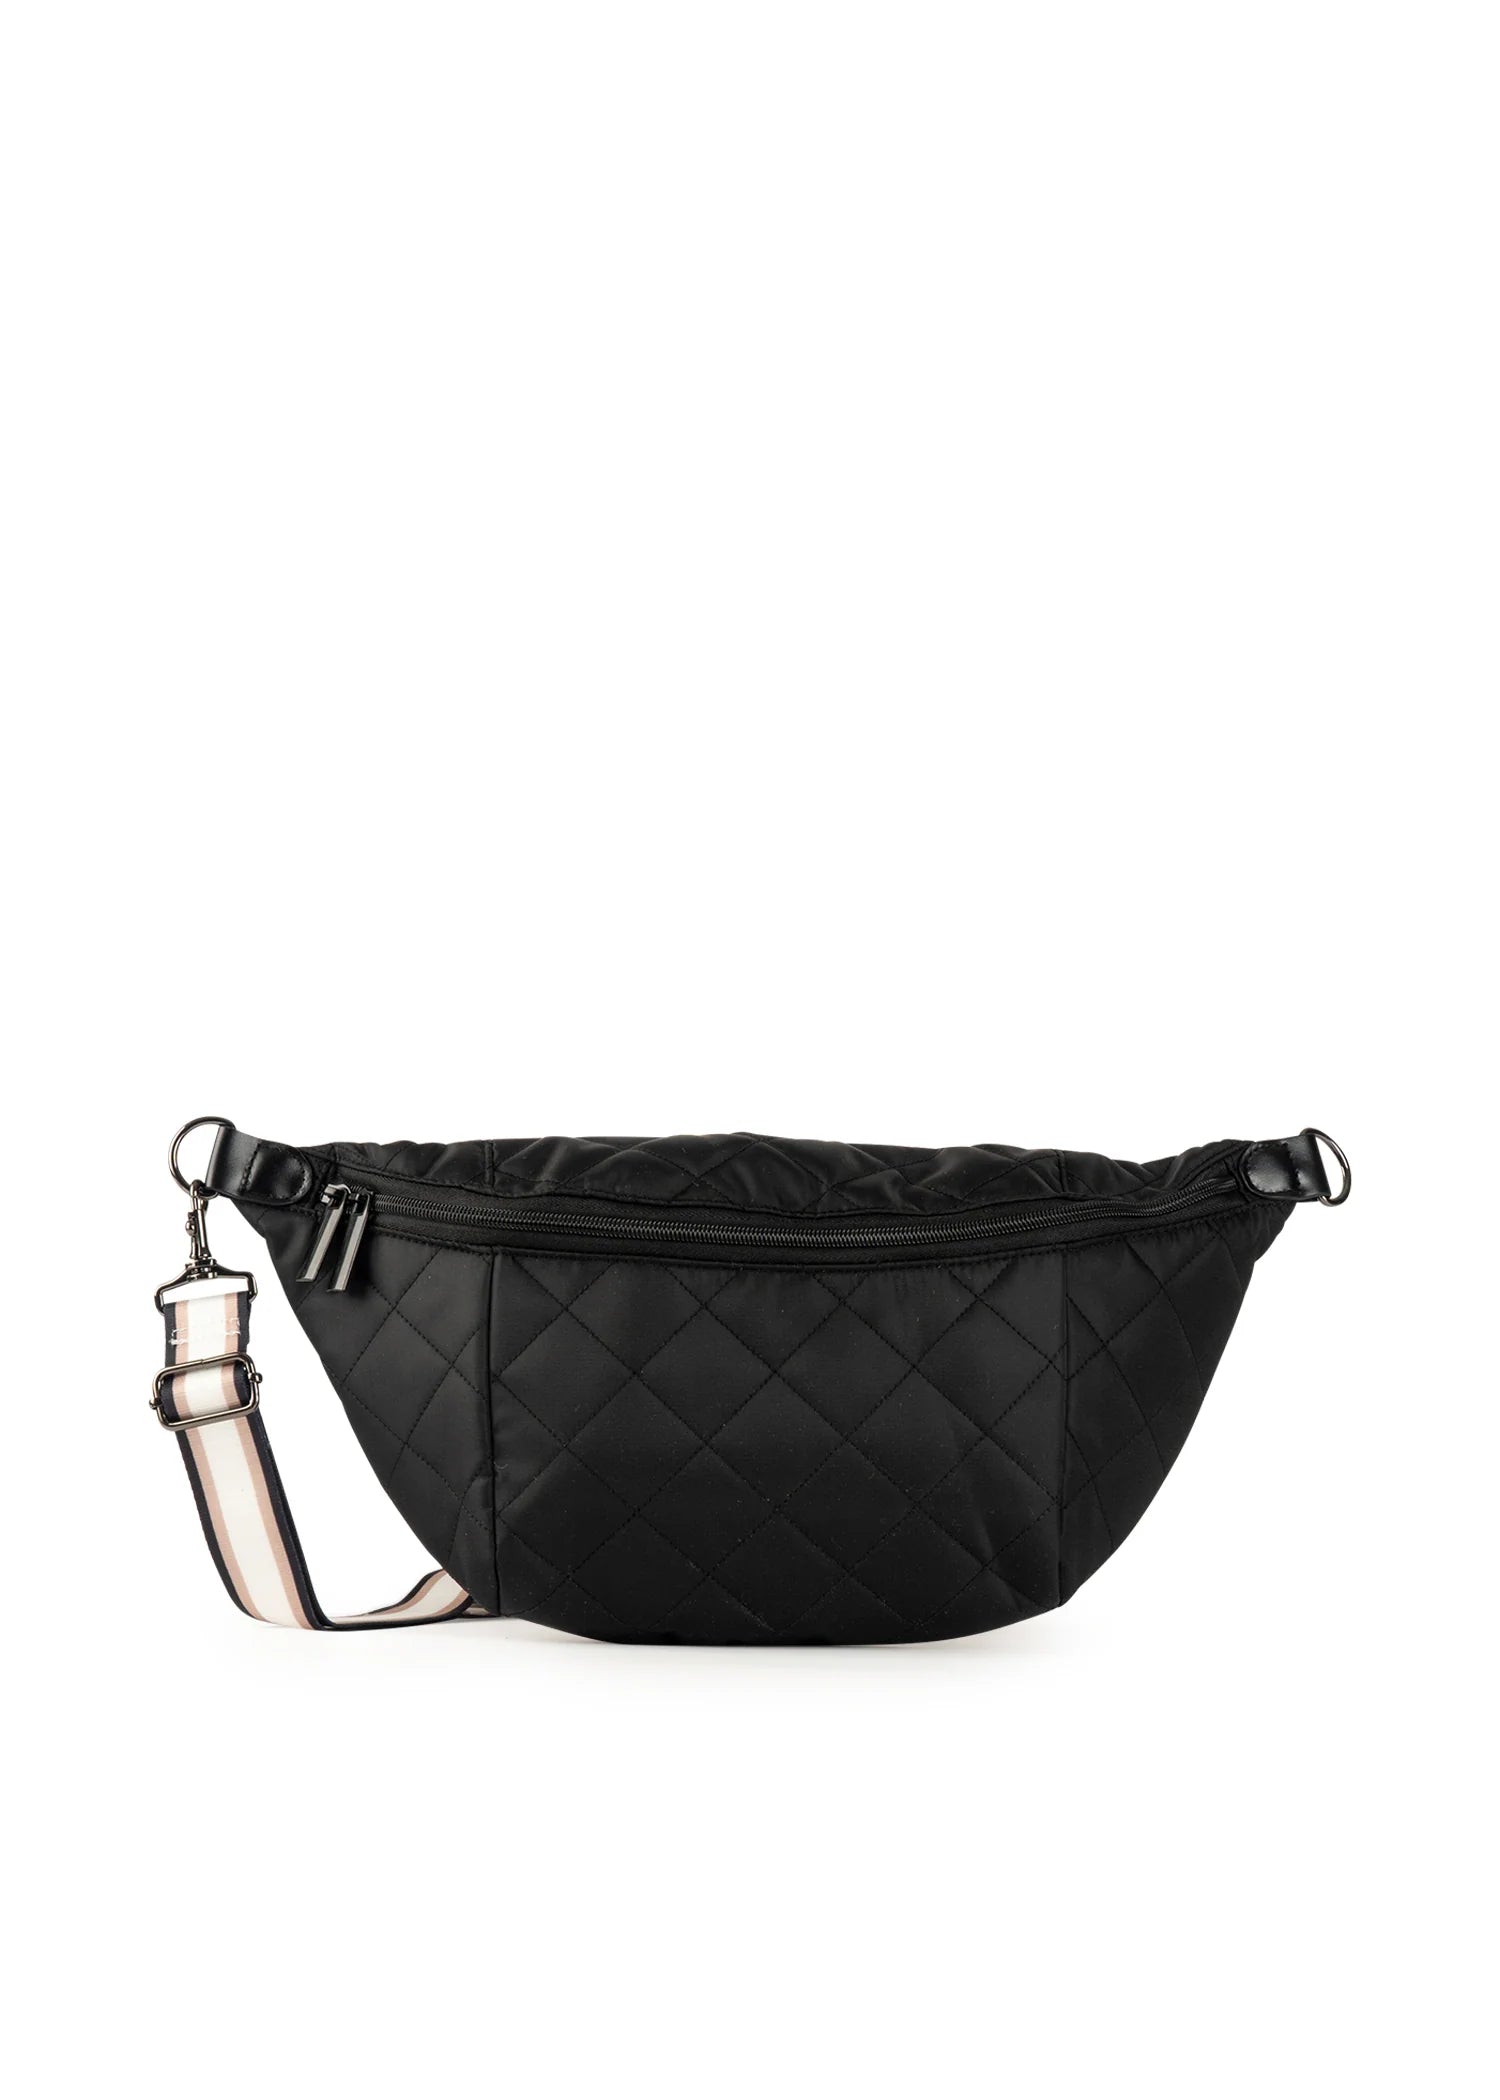 Sophisticated Simplicity: Ladies Black Nylon Quilted Large Crossbody Bag |  SeliniNY